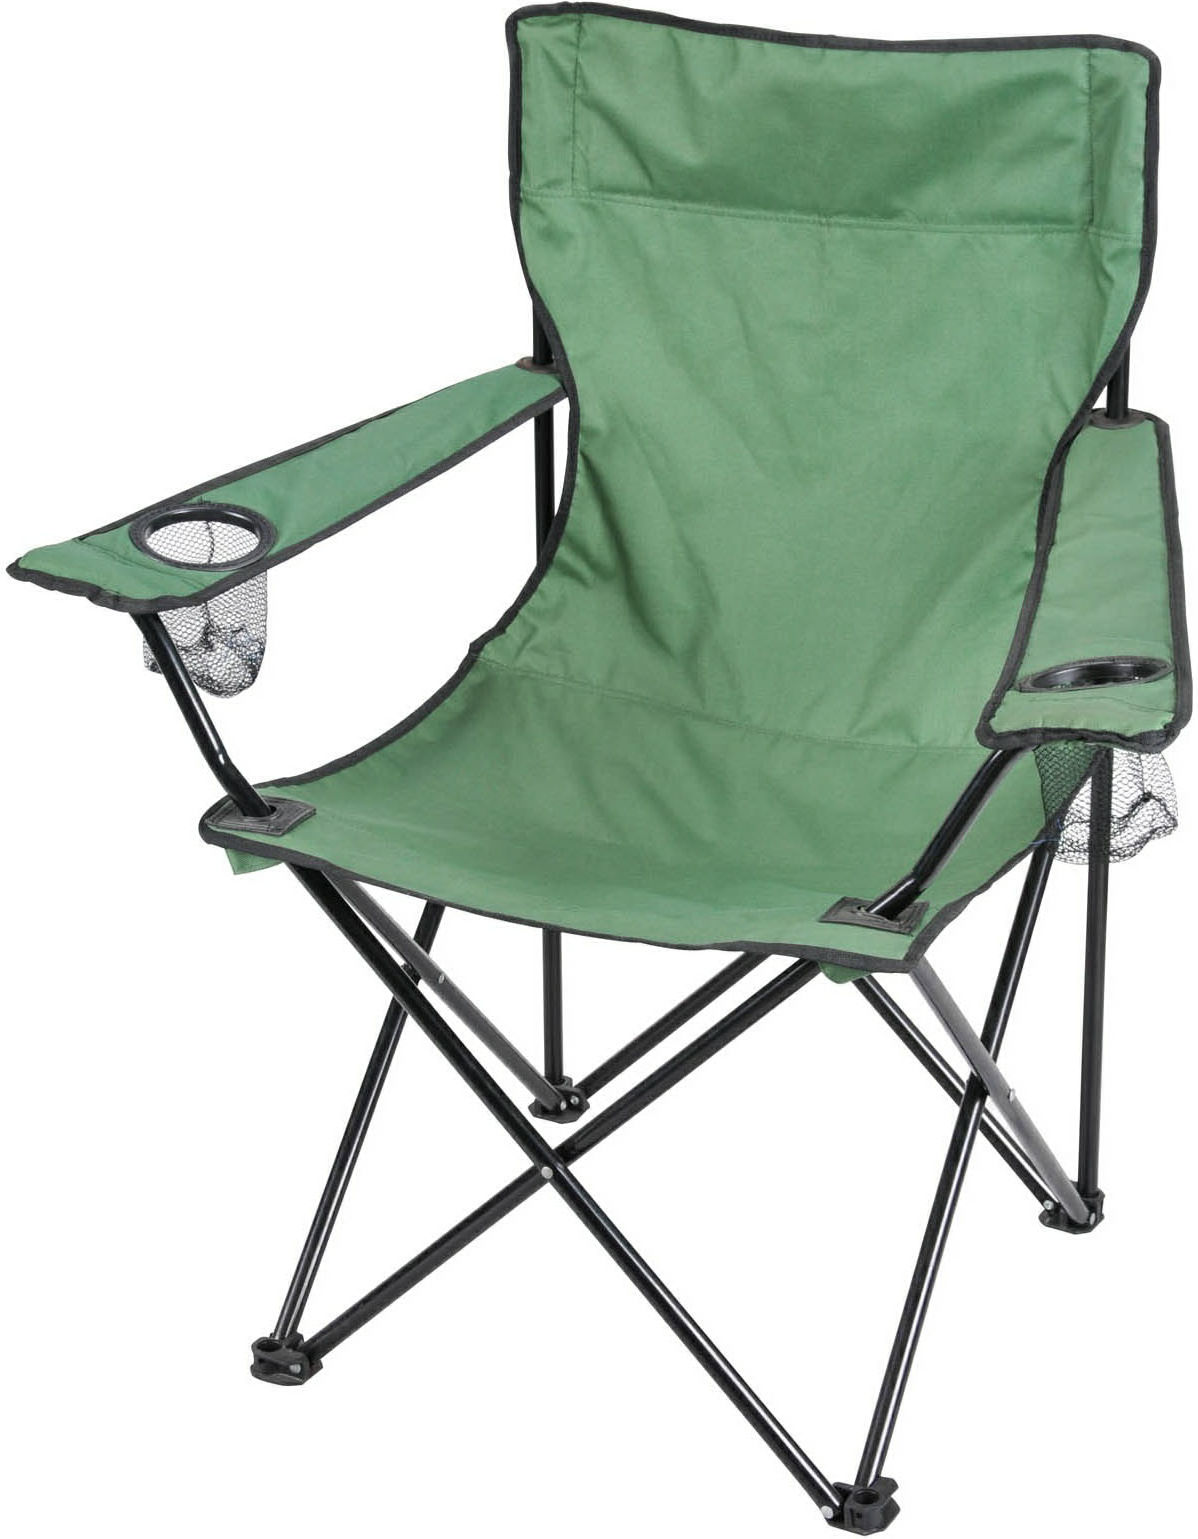 CAMPING CHAIR-COLLAPSIBLE - GREEN - Lee Distributors